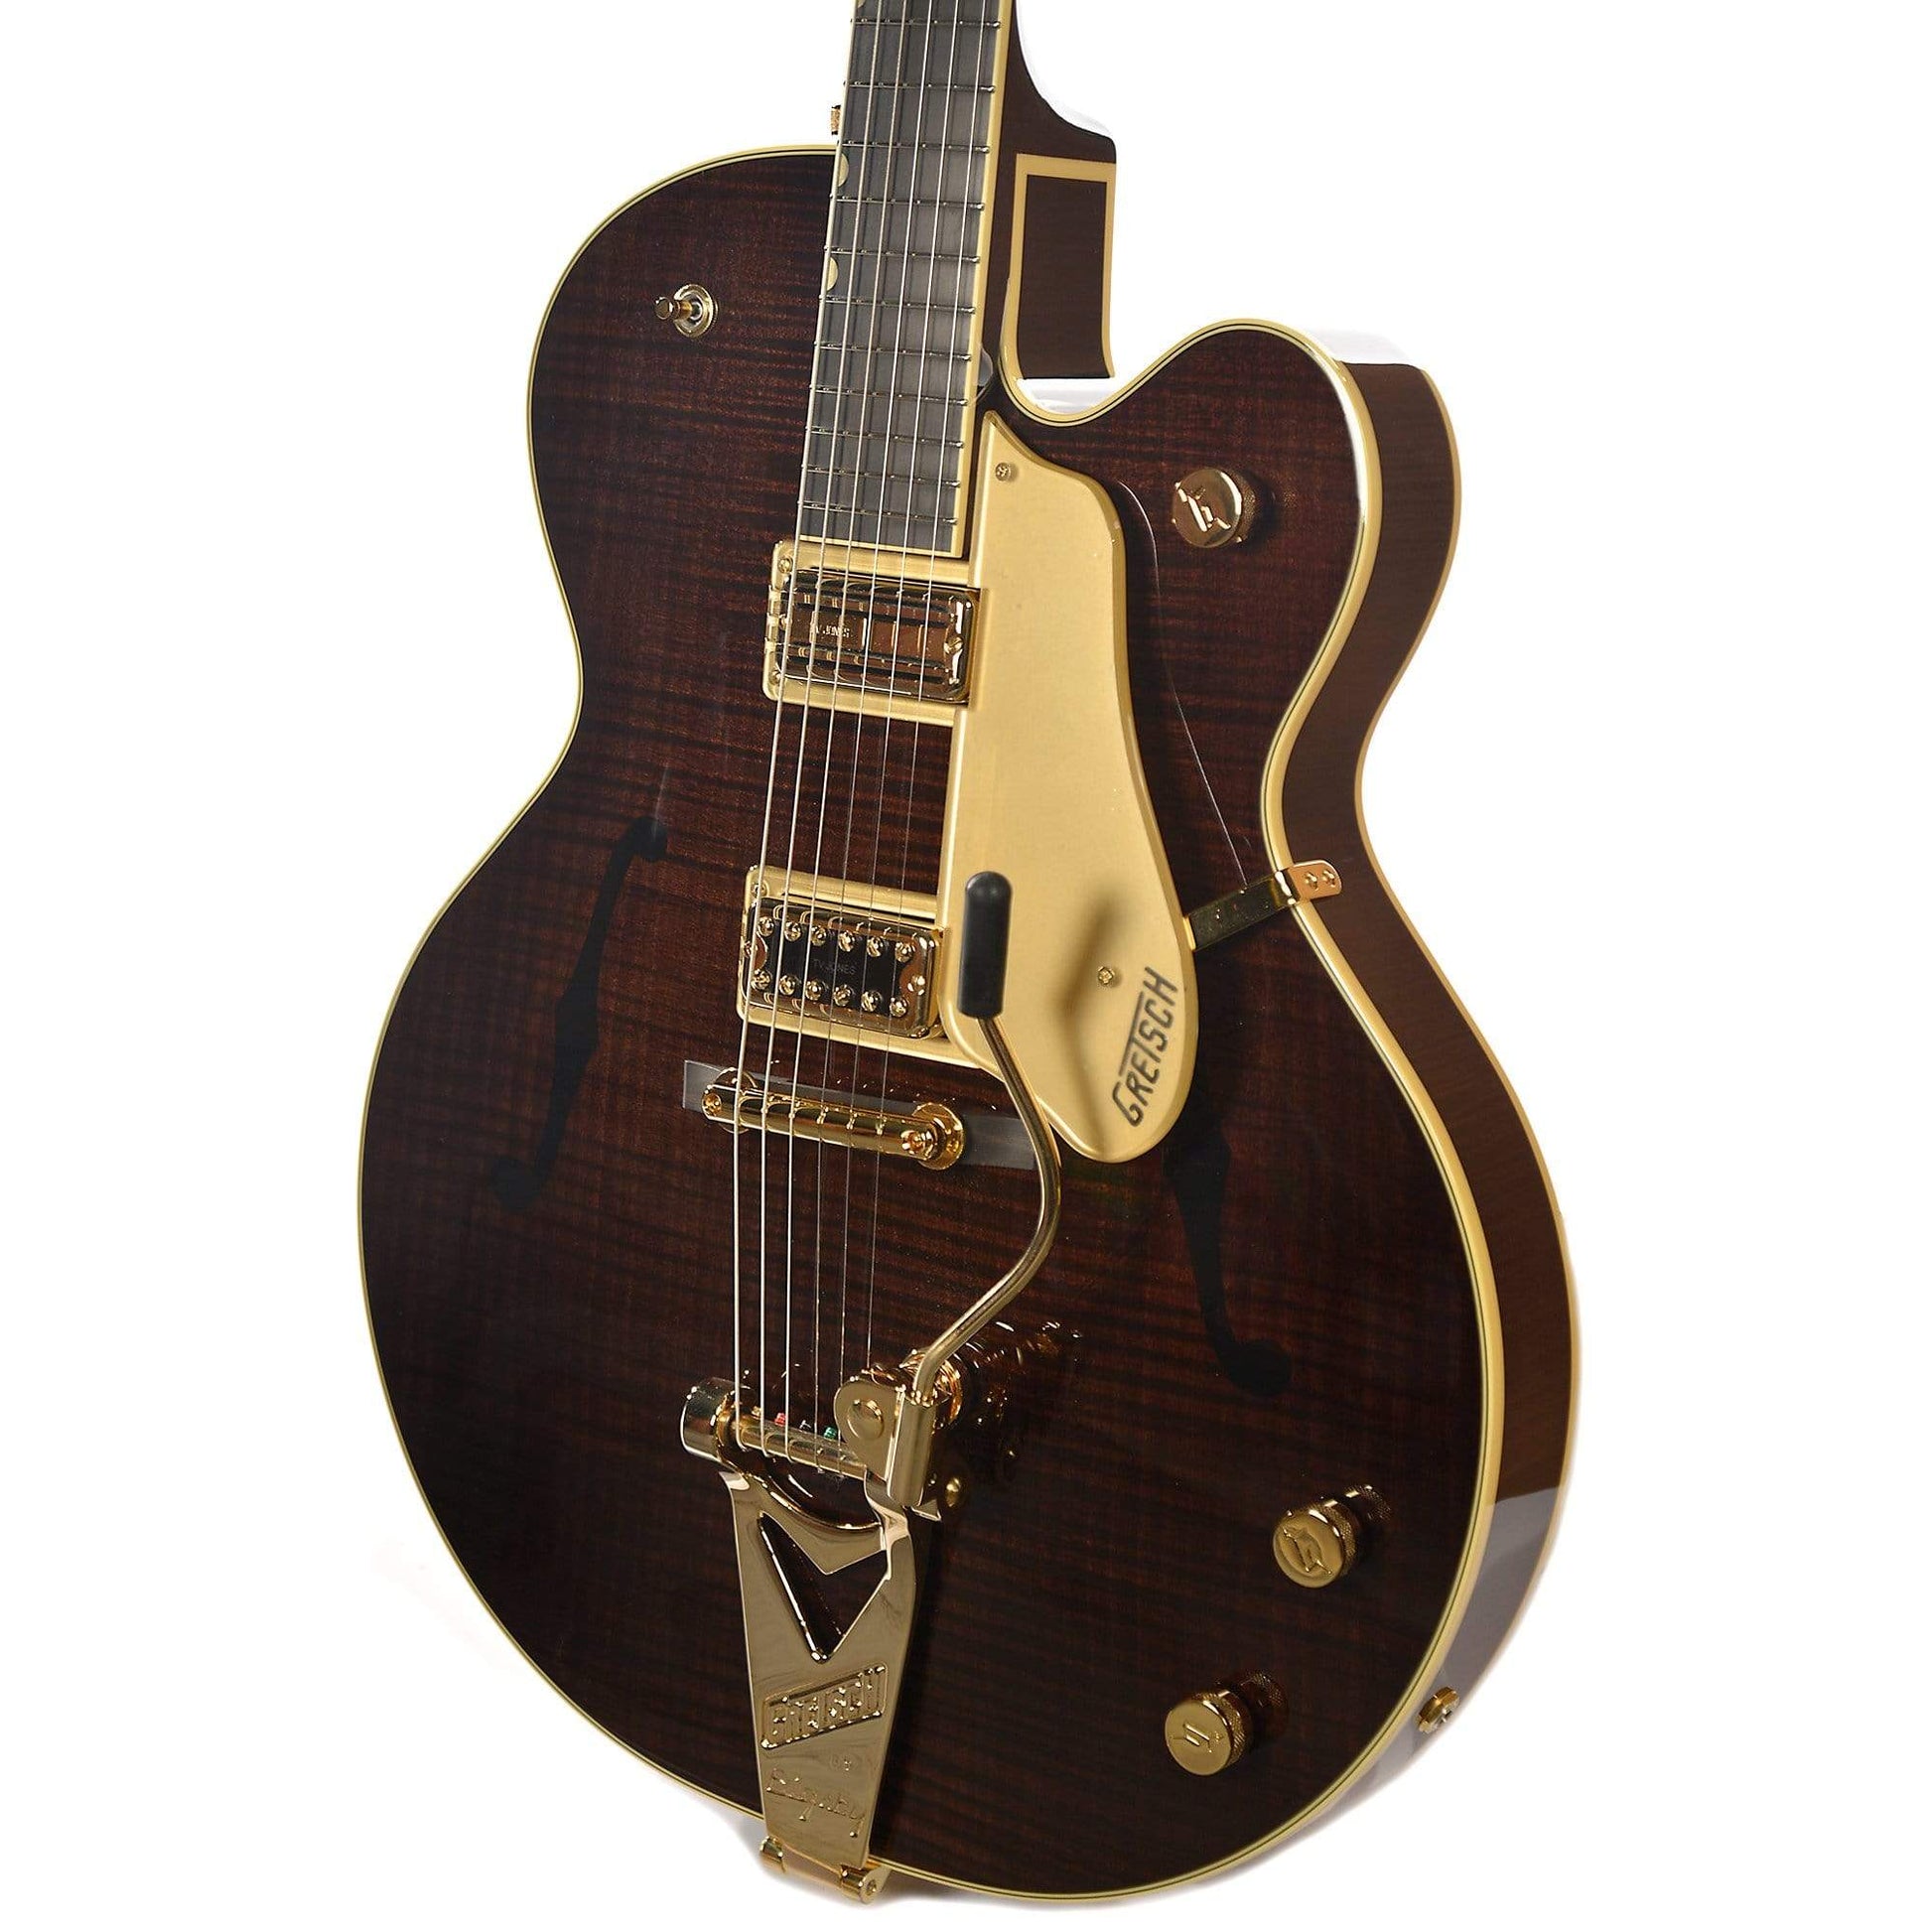 Gretsch G6122T-59 Vintage Select Edition Chet Atkins Country Gentleman w/Bigsby & TV Jones Pickups Electric Guitars / Hollow Body